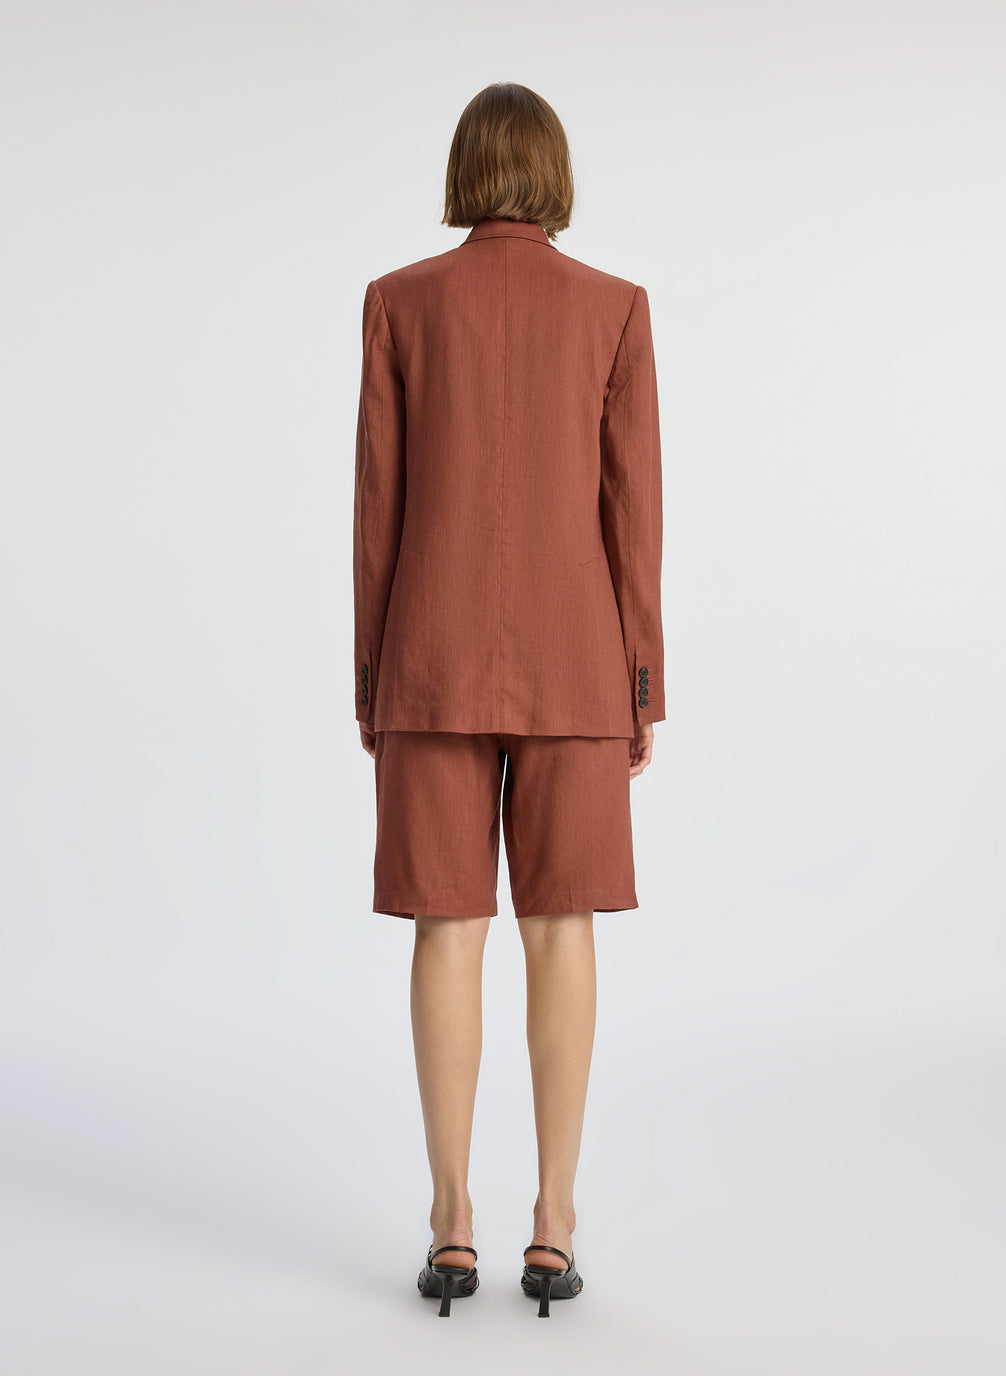 back view of woman wearing brown short suit